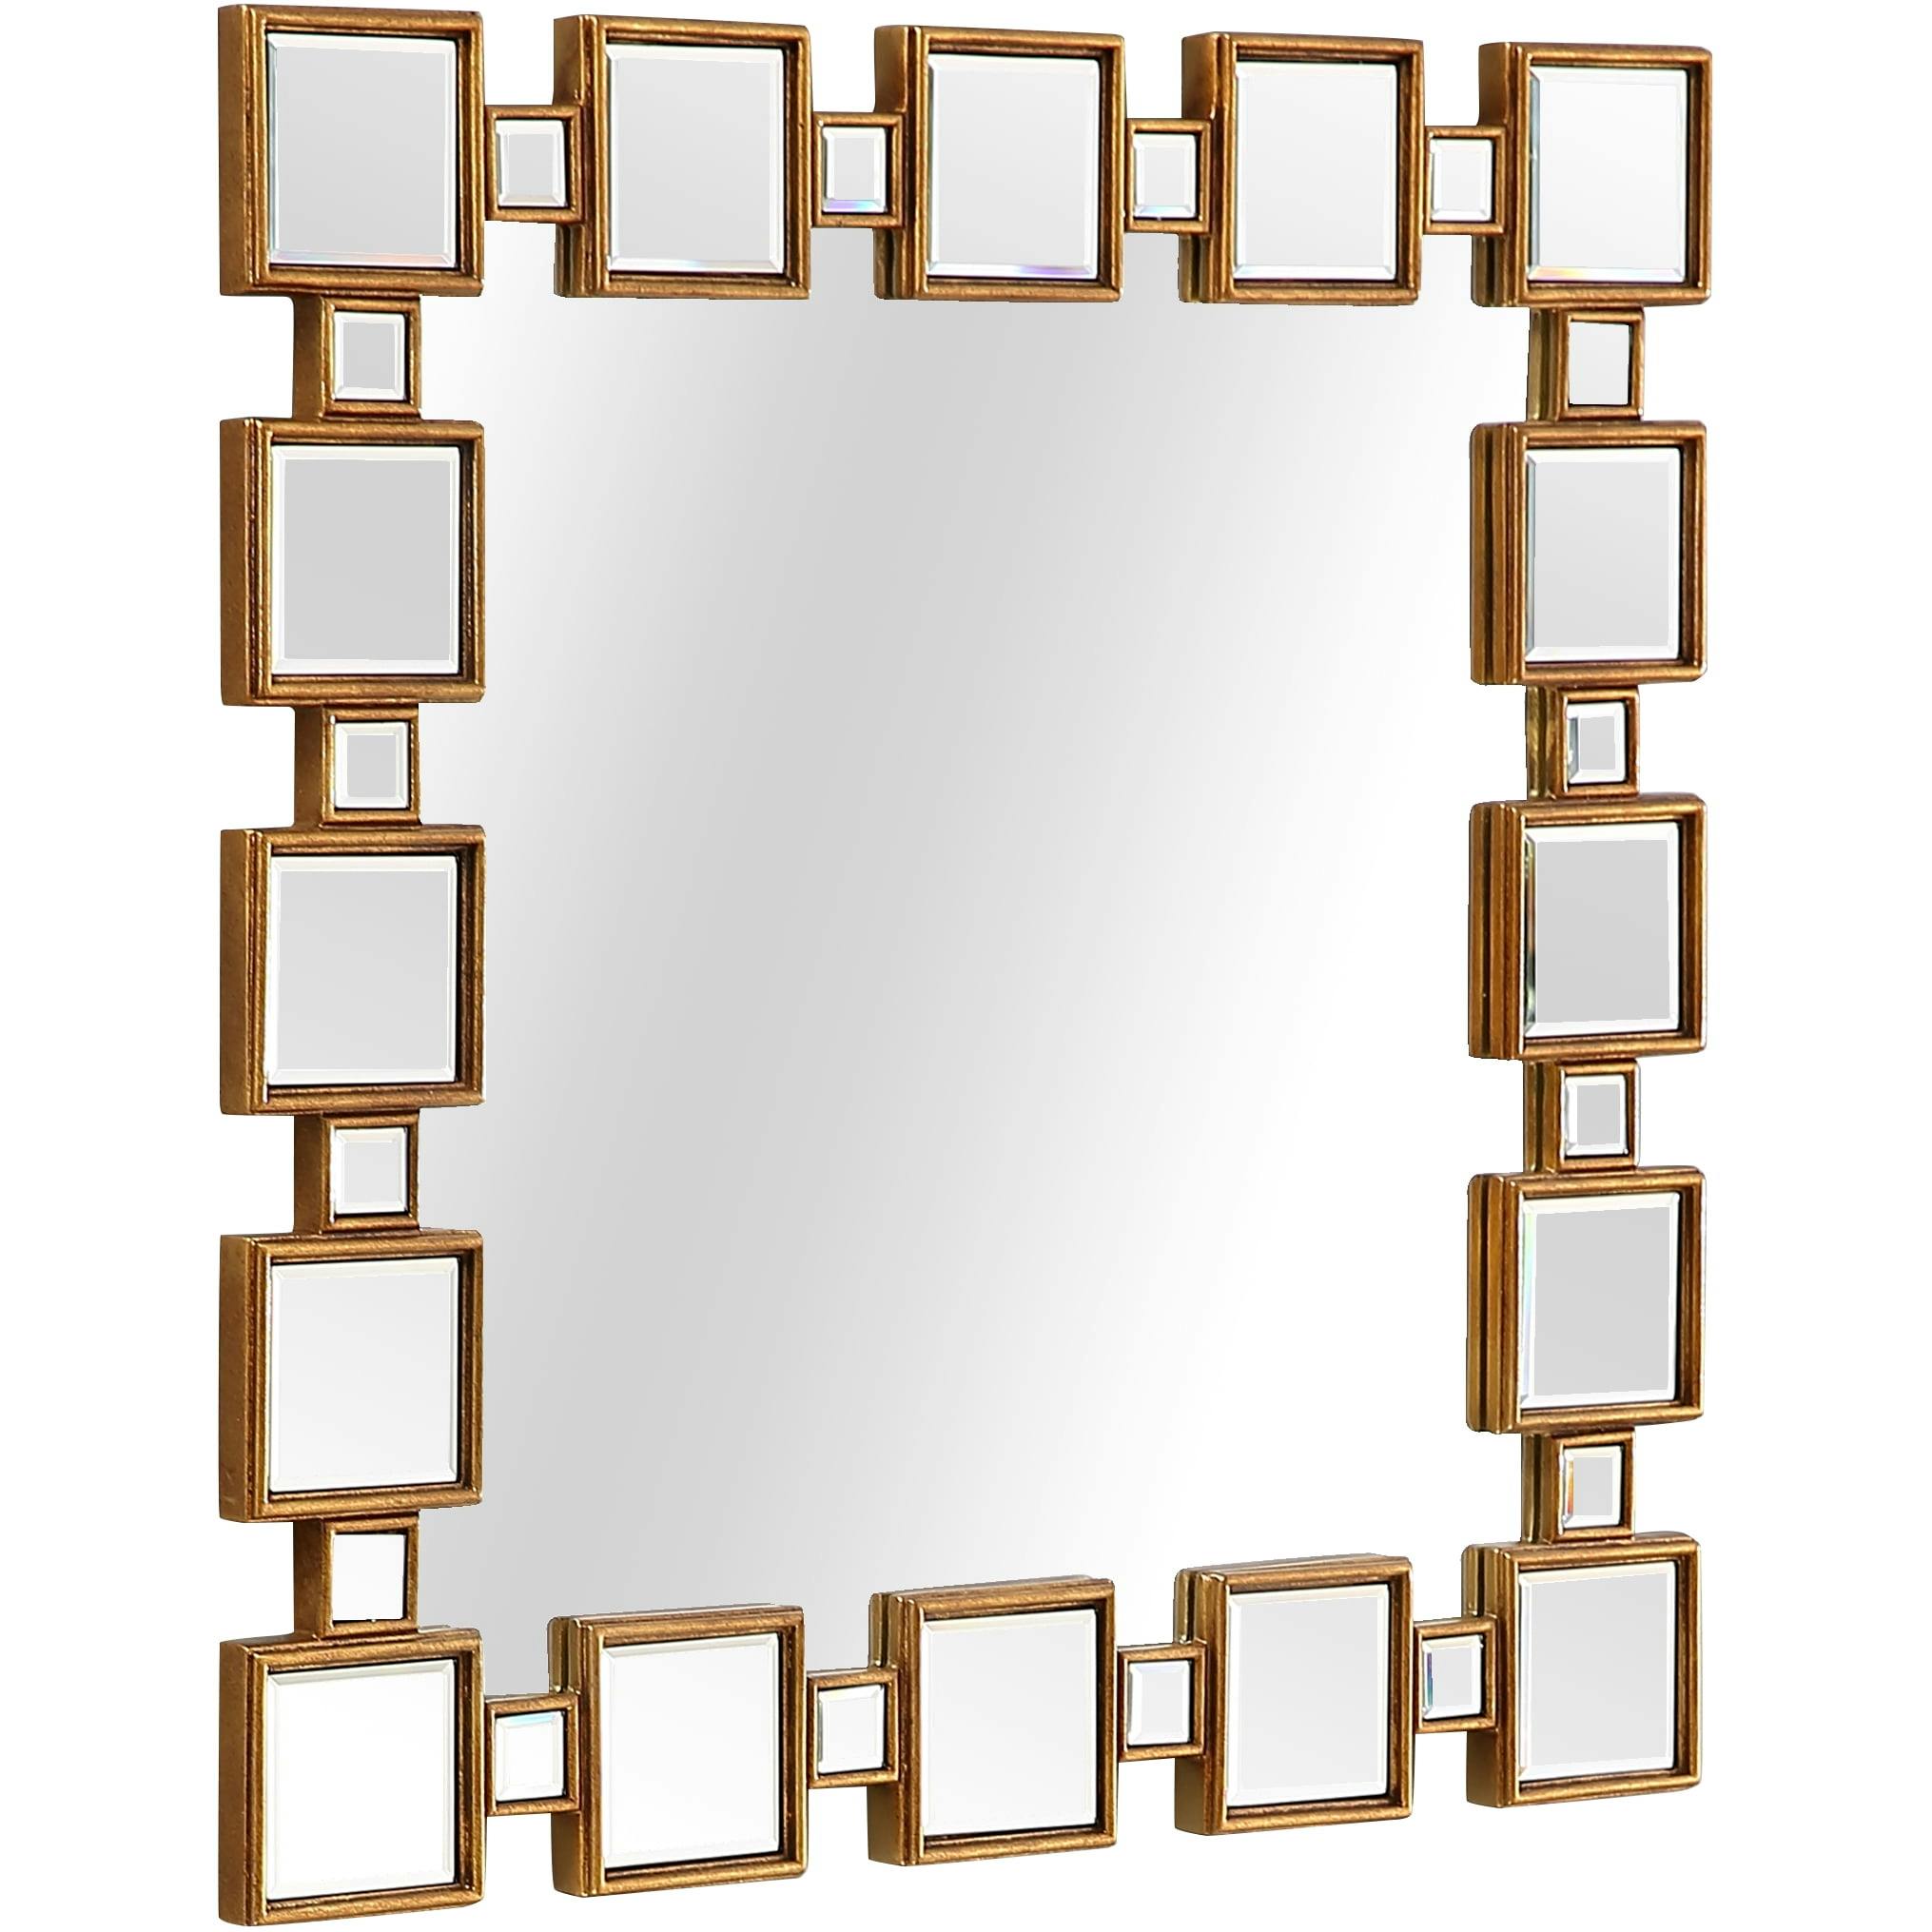 Orion 37" Square Layered Gold & Wood Wall Mirror